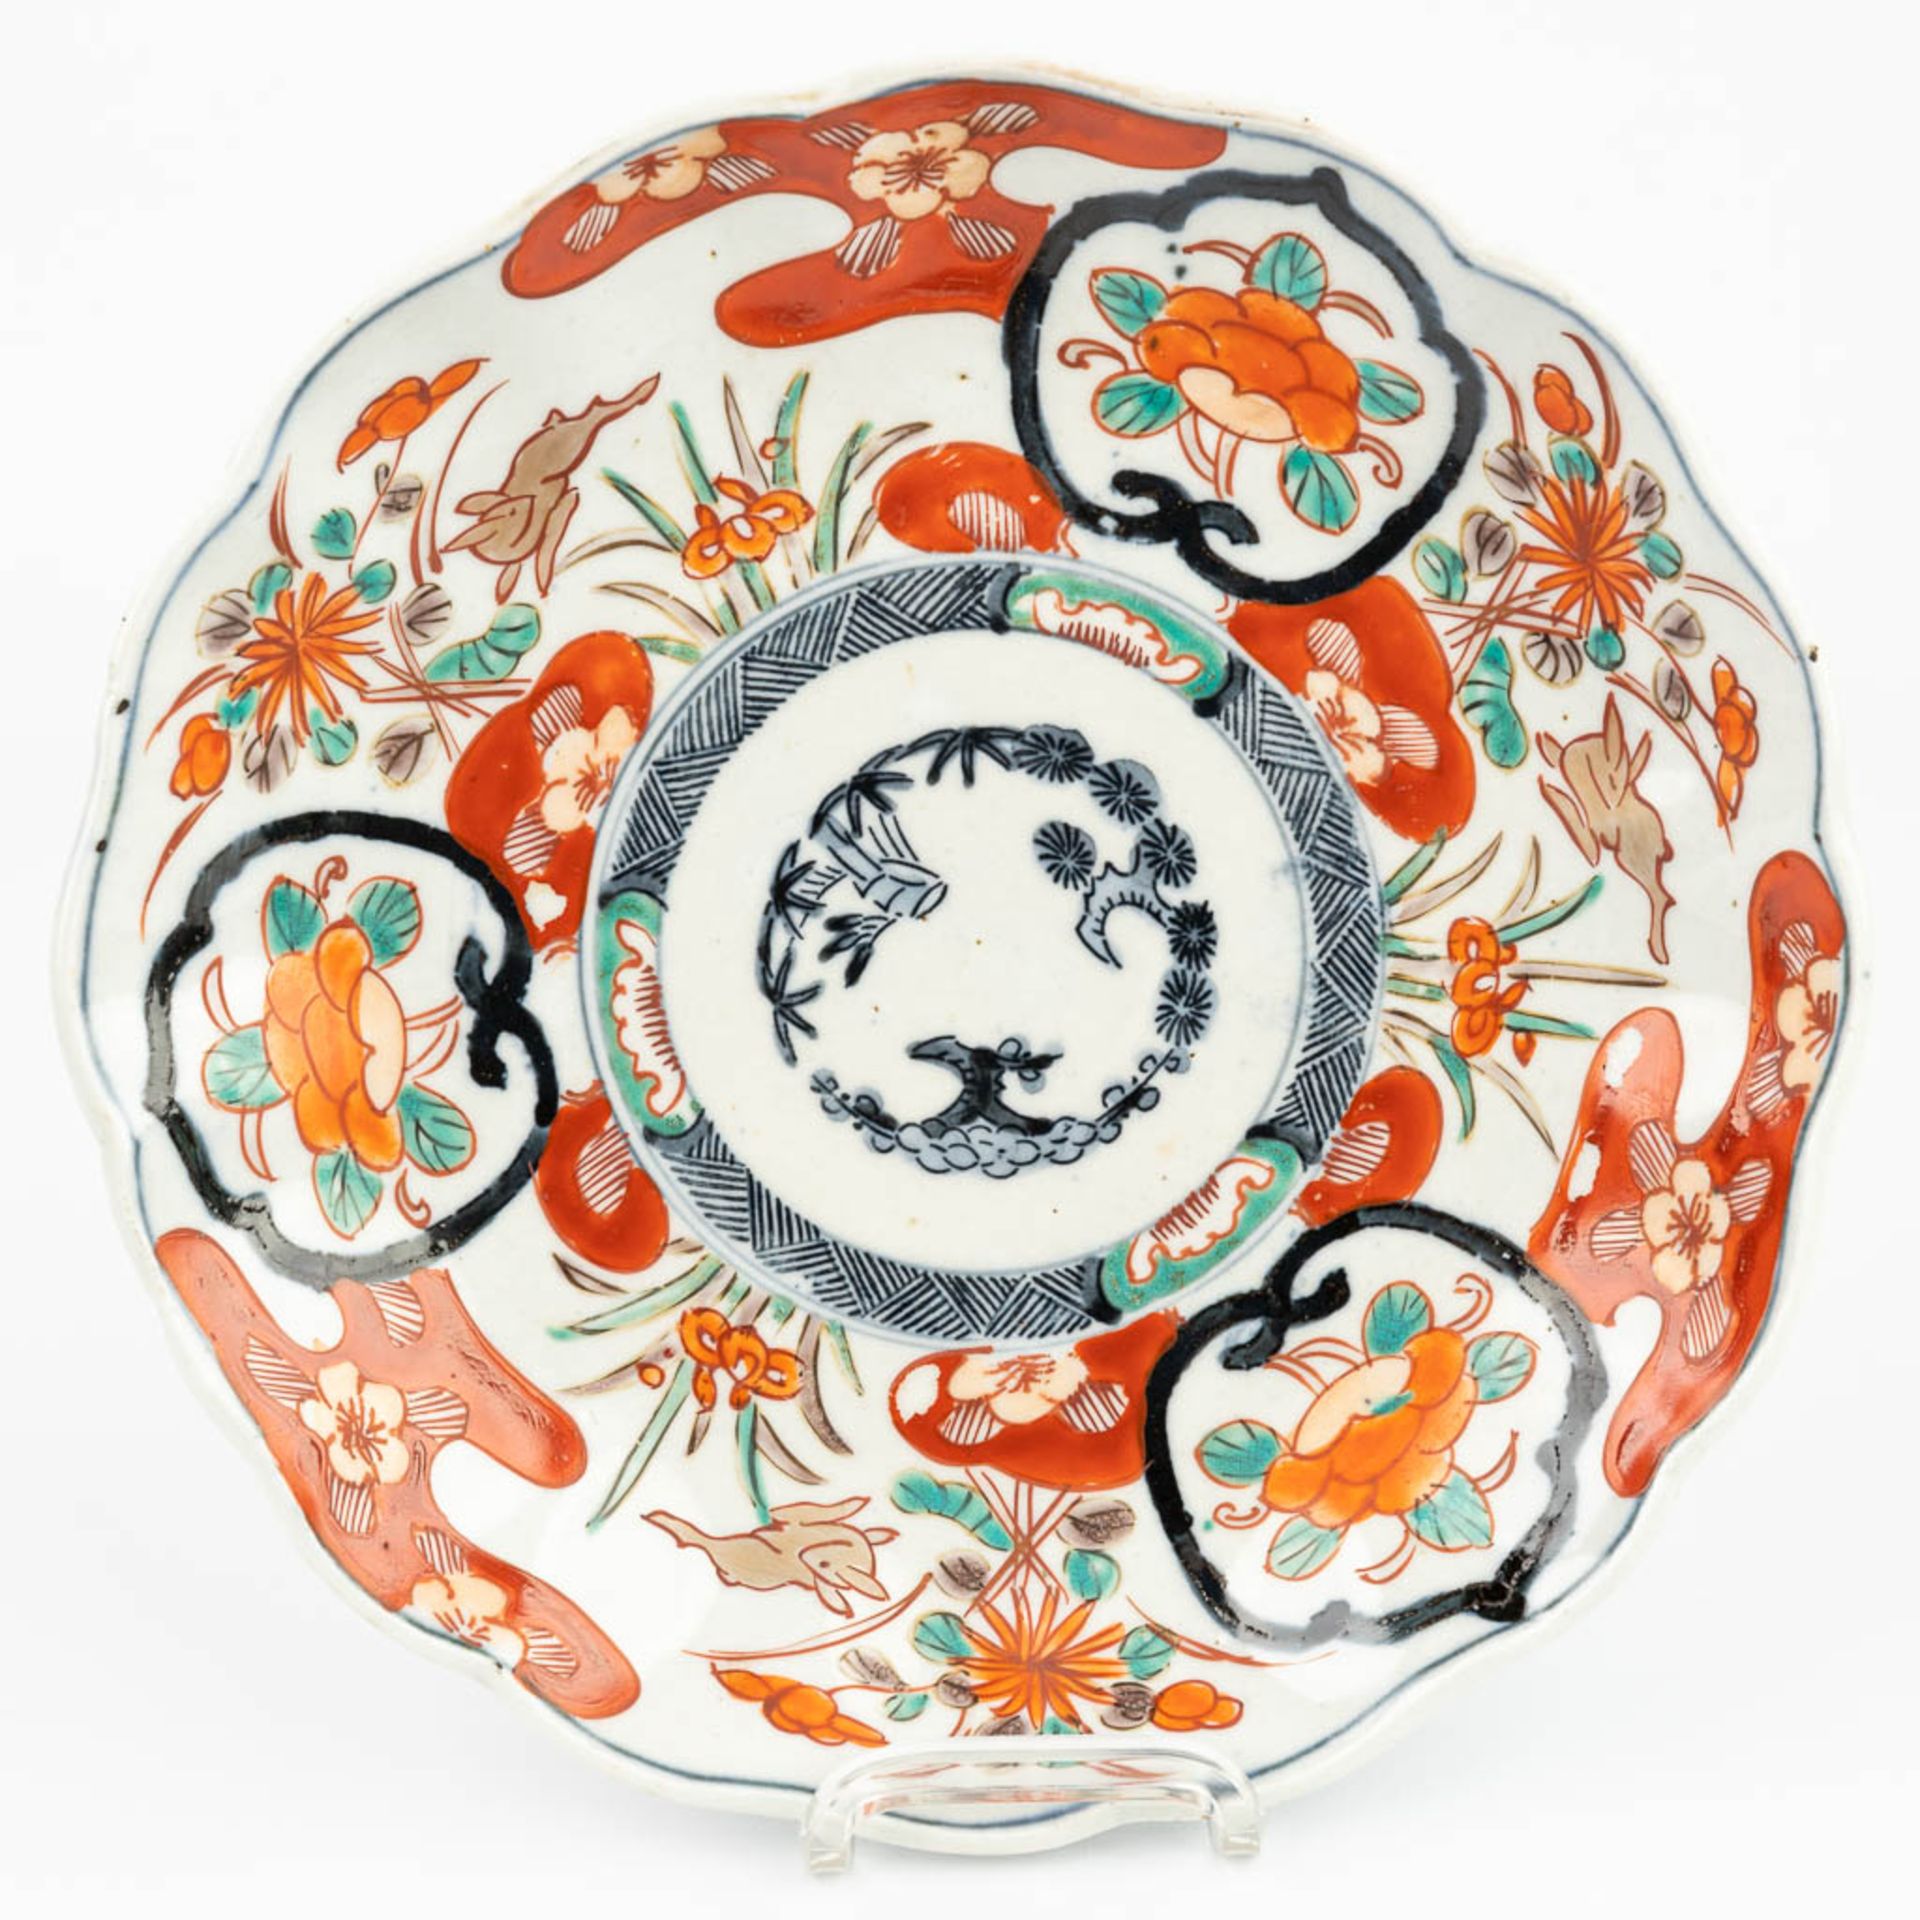 A collection of 7 Chinese and Japanese plates made of porcelain, Imari. - Image 9 of 13